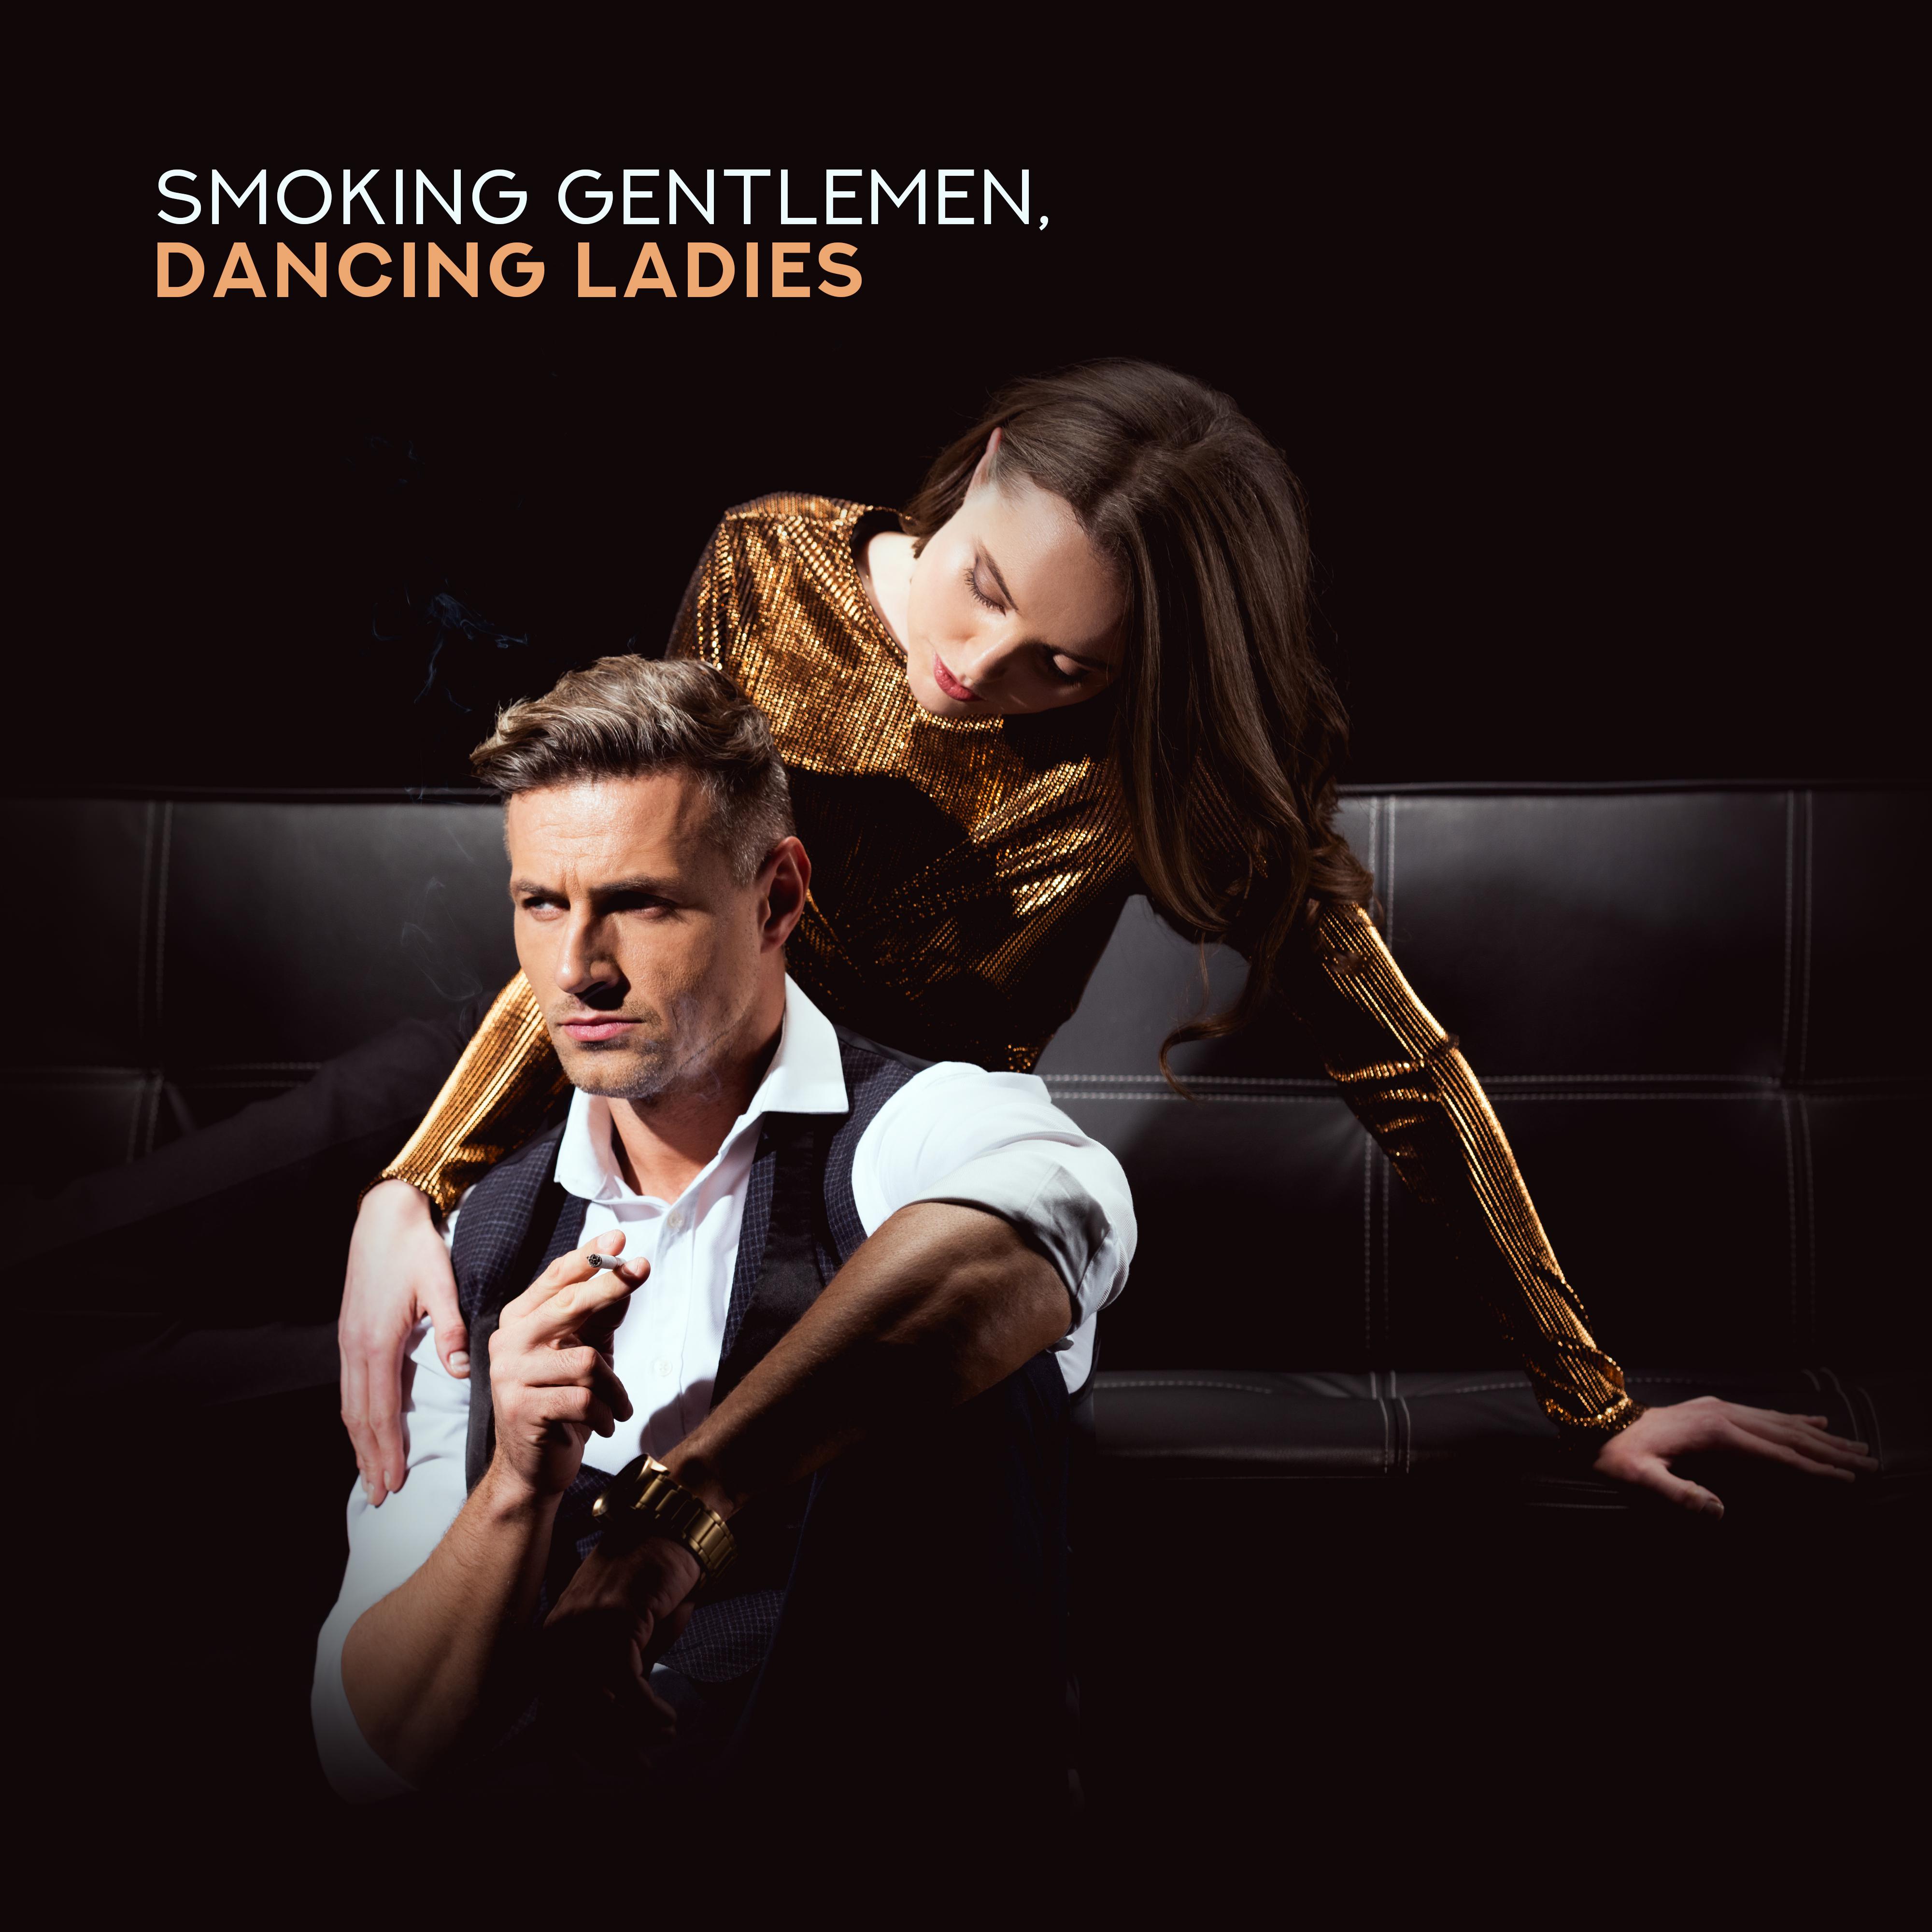 Smoking Gentlemen, Dancing Ladies: 2019 Smooth Swing Jazz Music Selection for Elegant Jazz Club, Vintage Party Melodies with Sounds of Piano, Contrabass, Trumpet & More